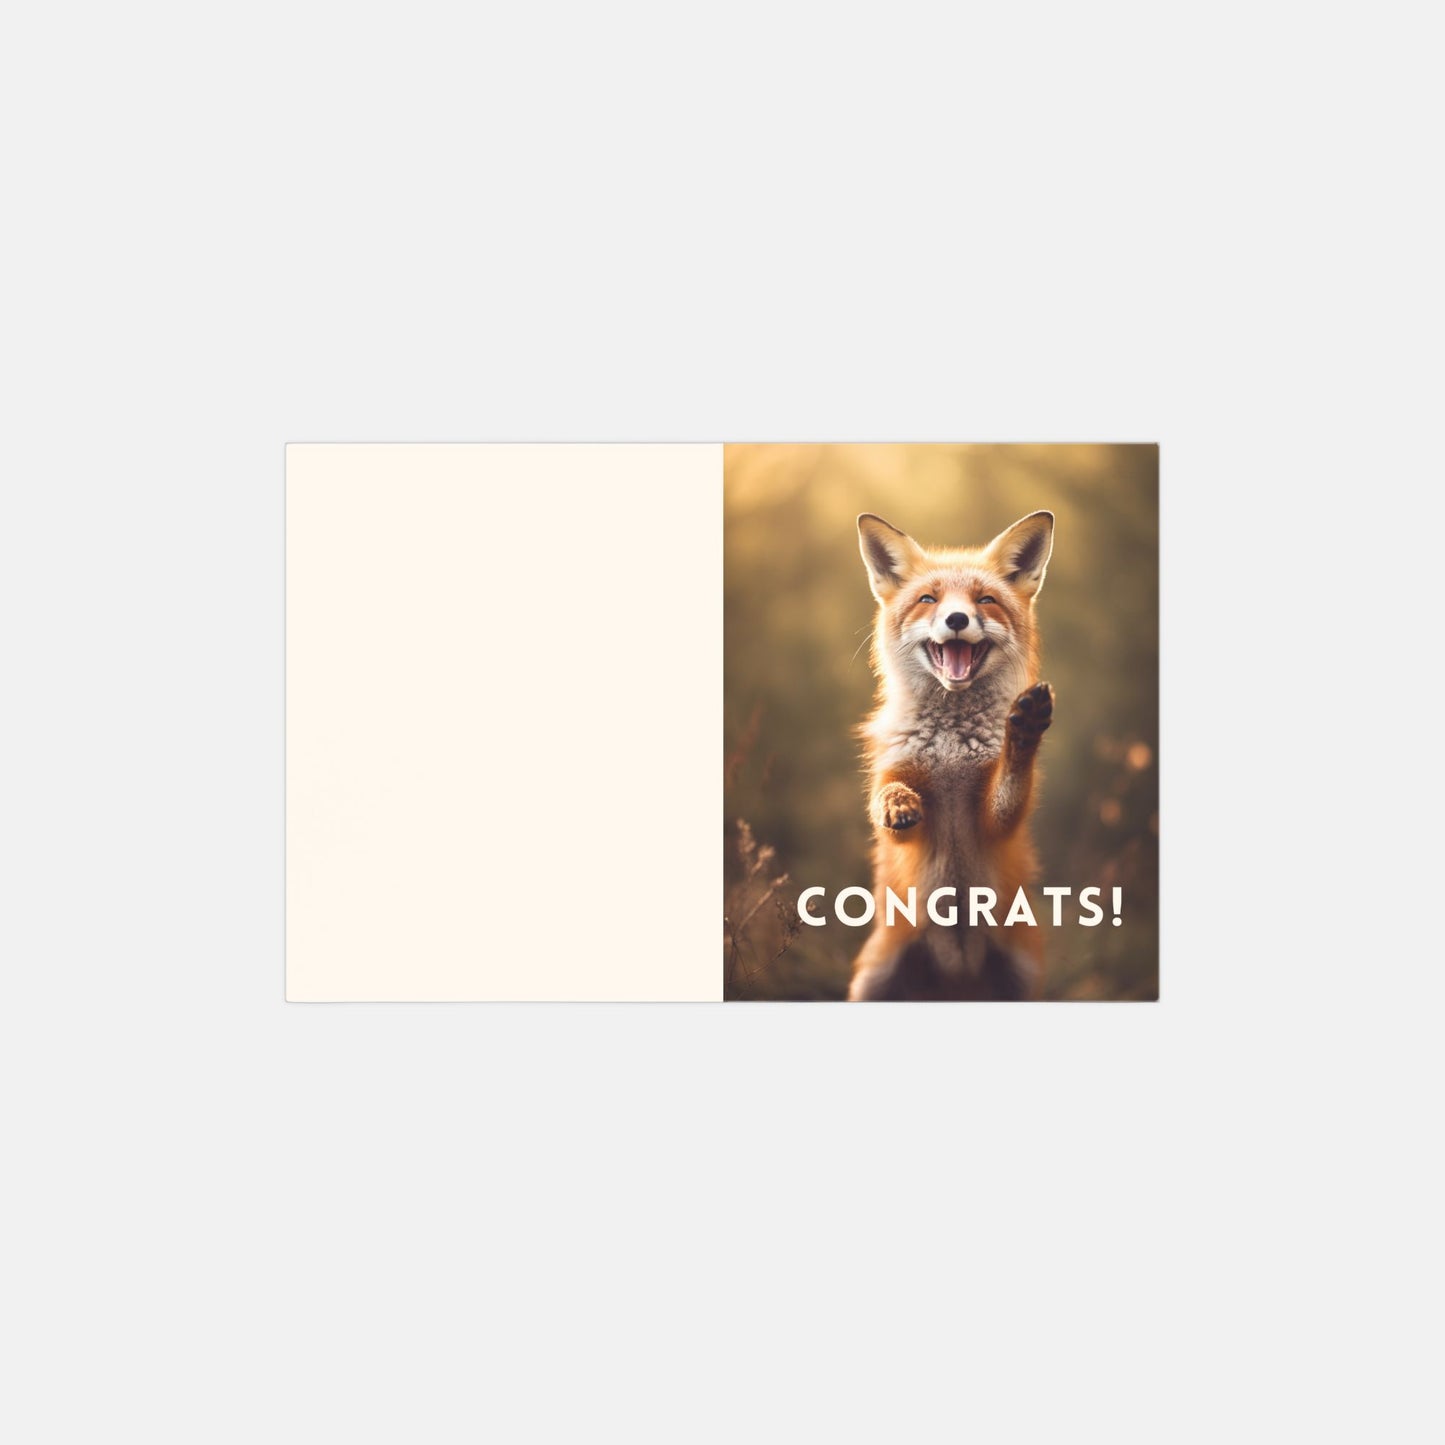 Red Fox Congratulations Cards - 10 pack